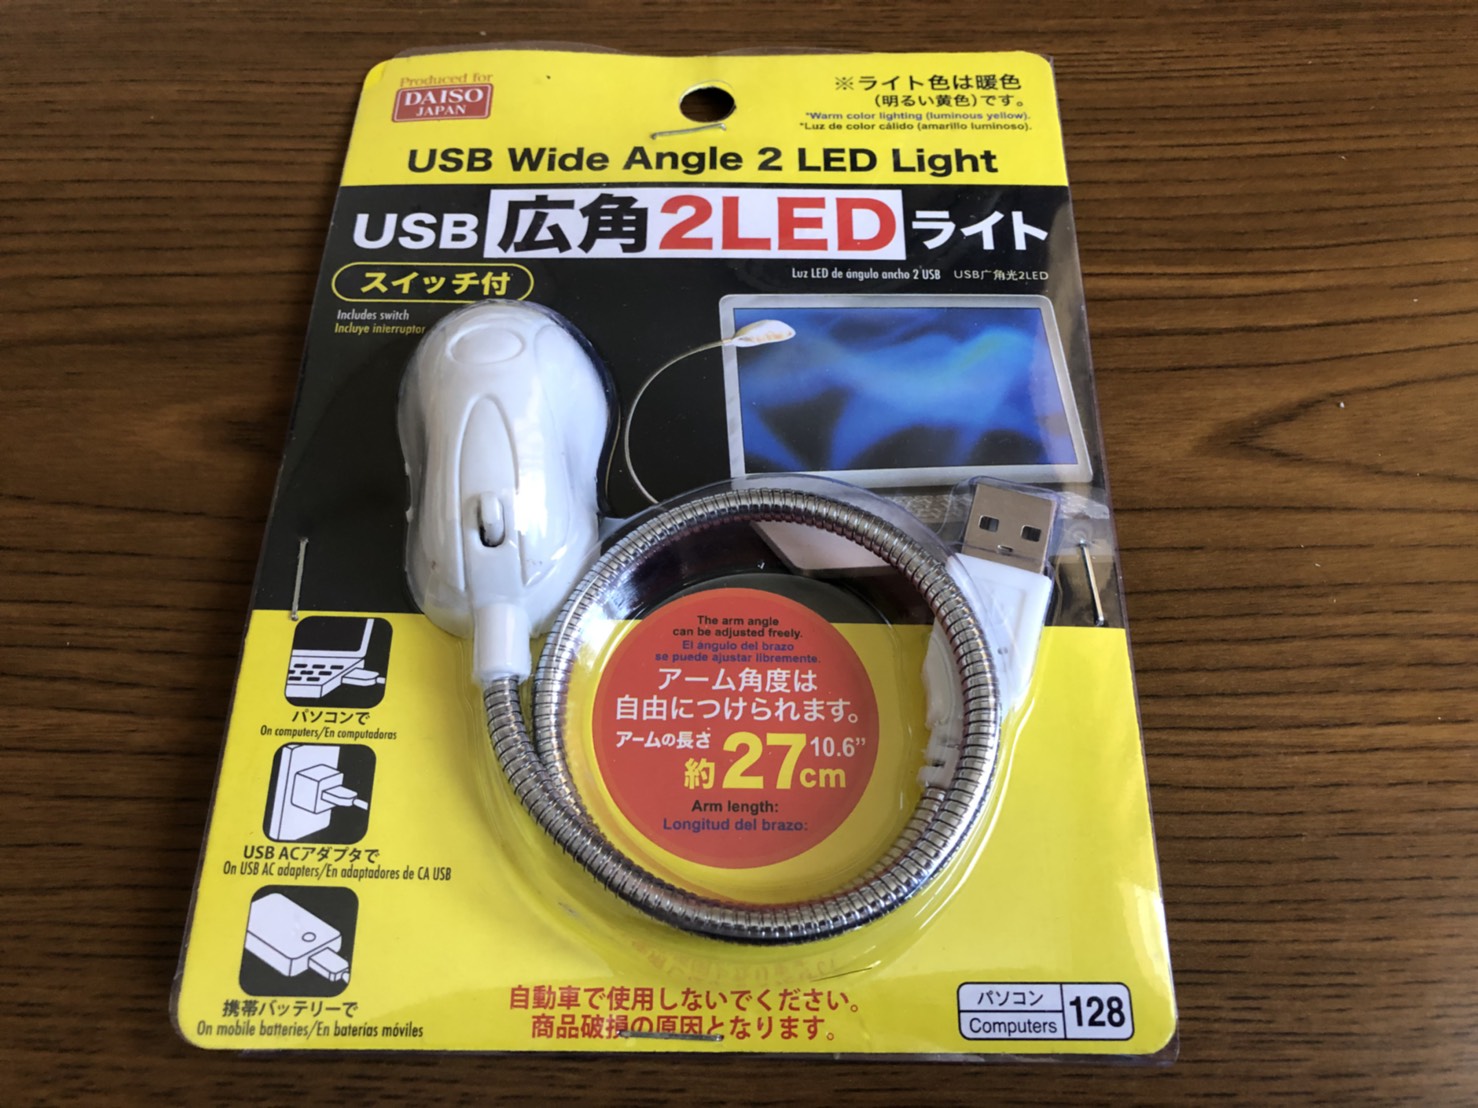 Usb 広角2ledライト スイッチ付 電球色 暖色 まろパパのhow About This